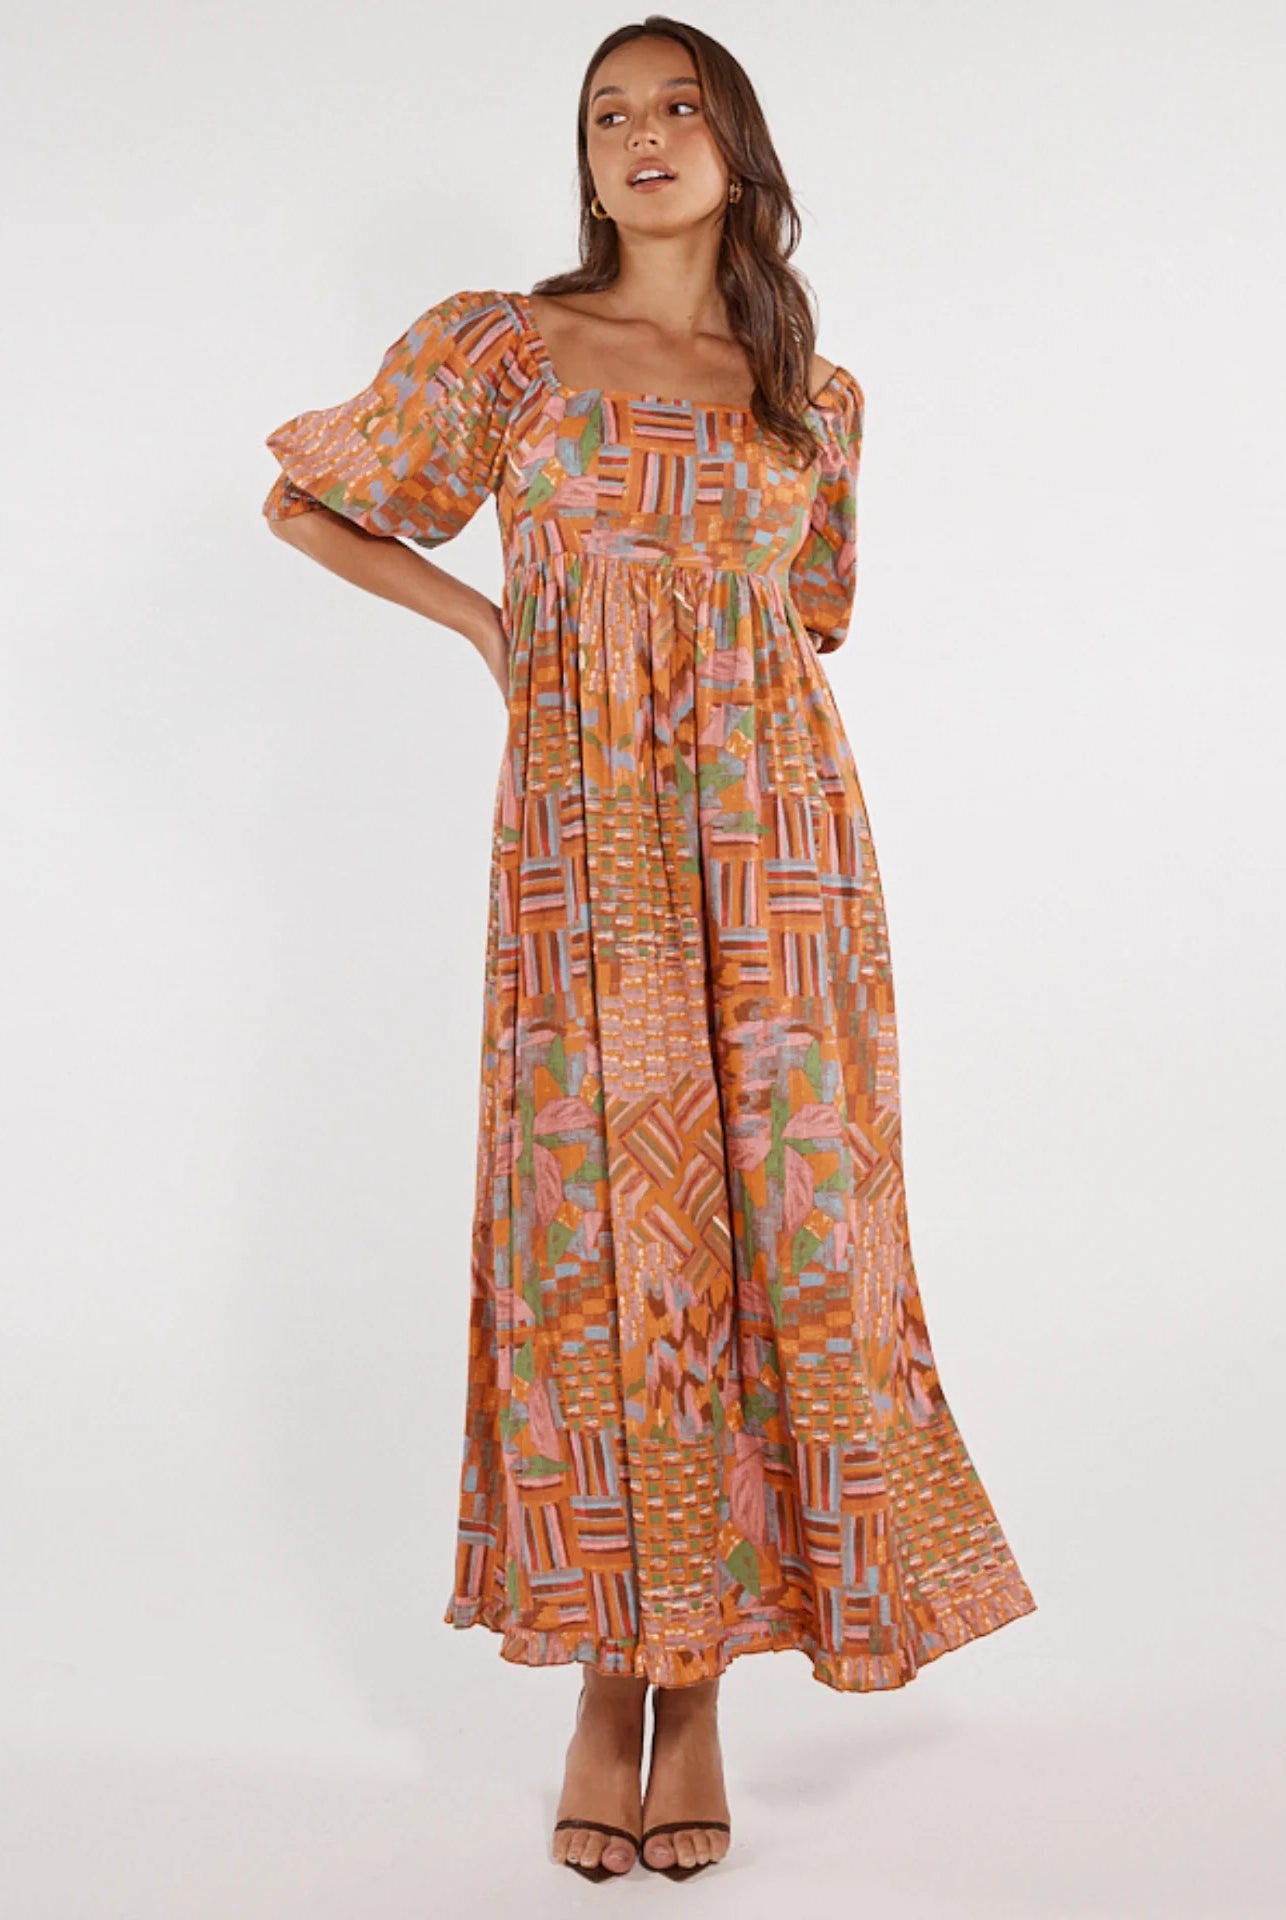 Mosaic Print Maxi Dress from Girl and the Sun